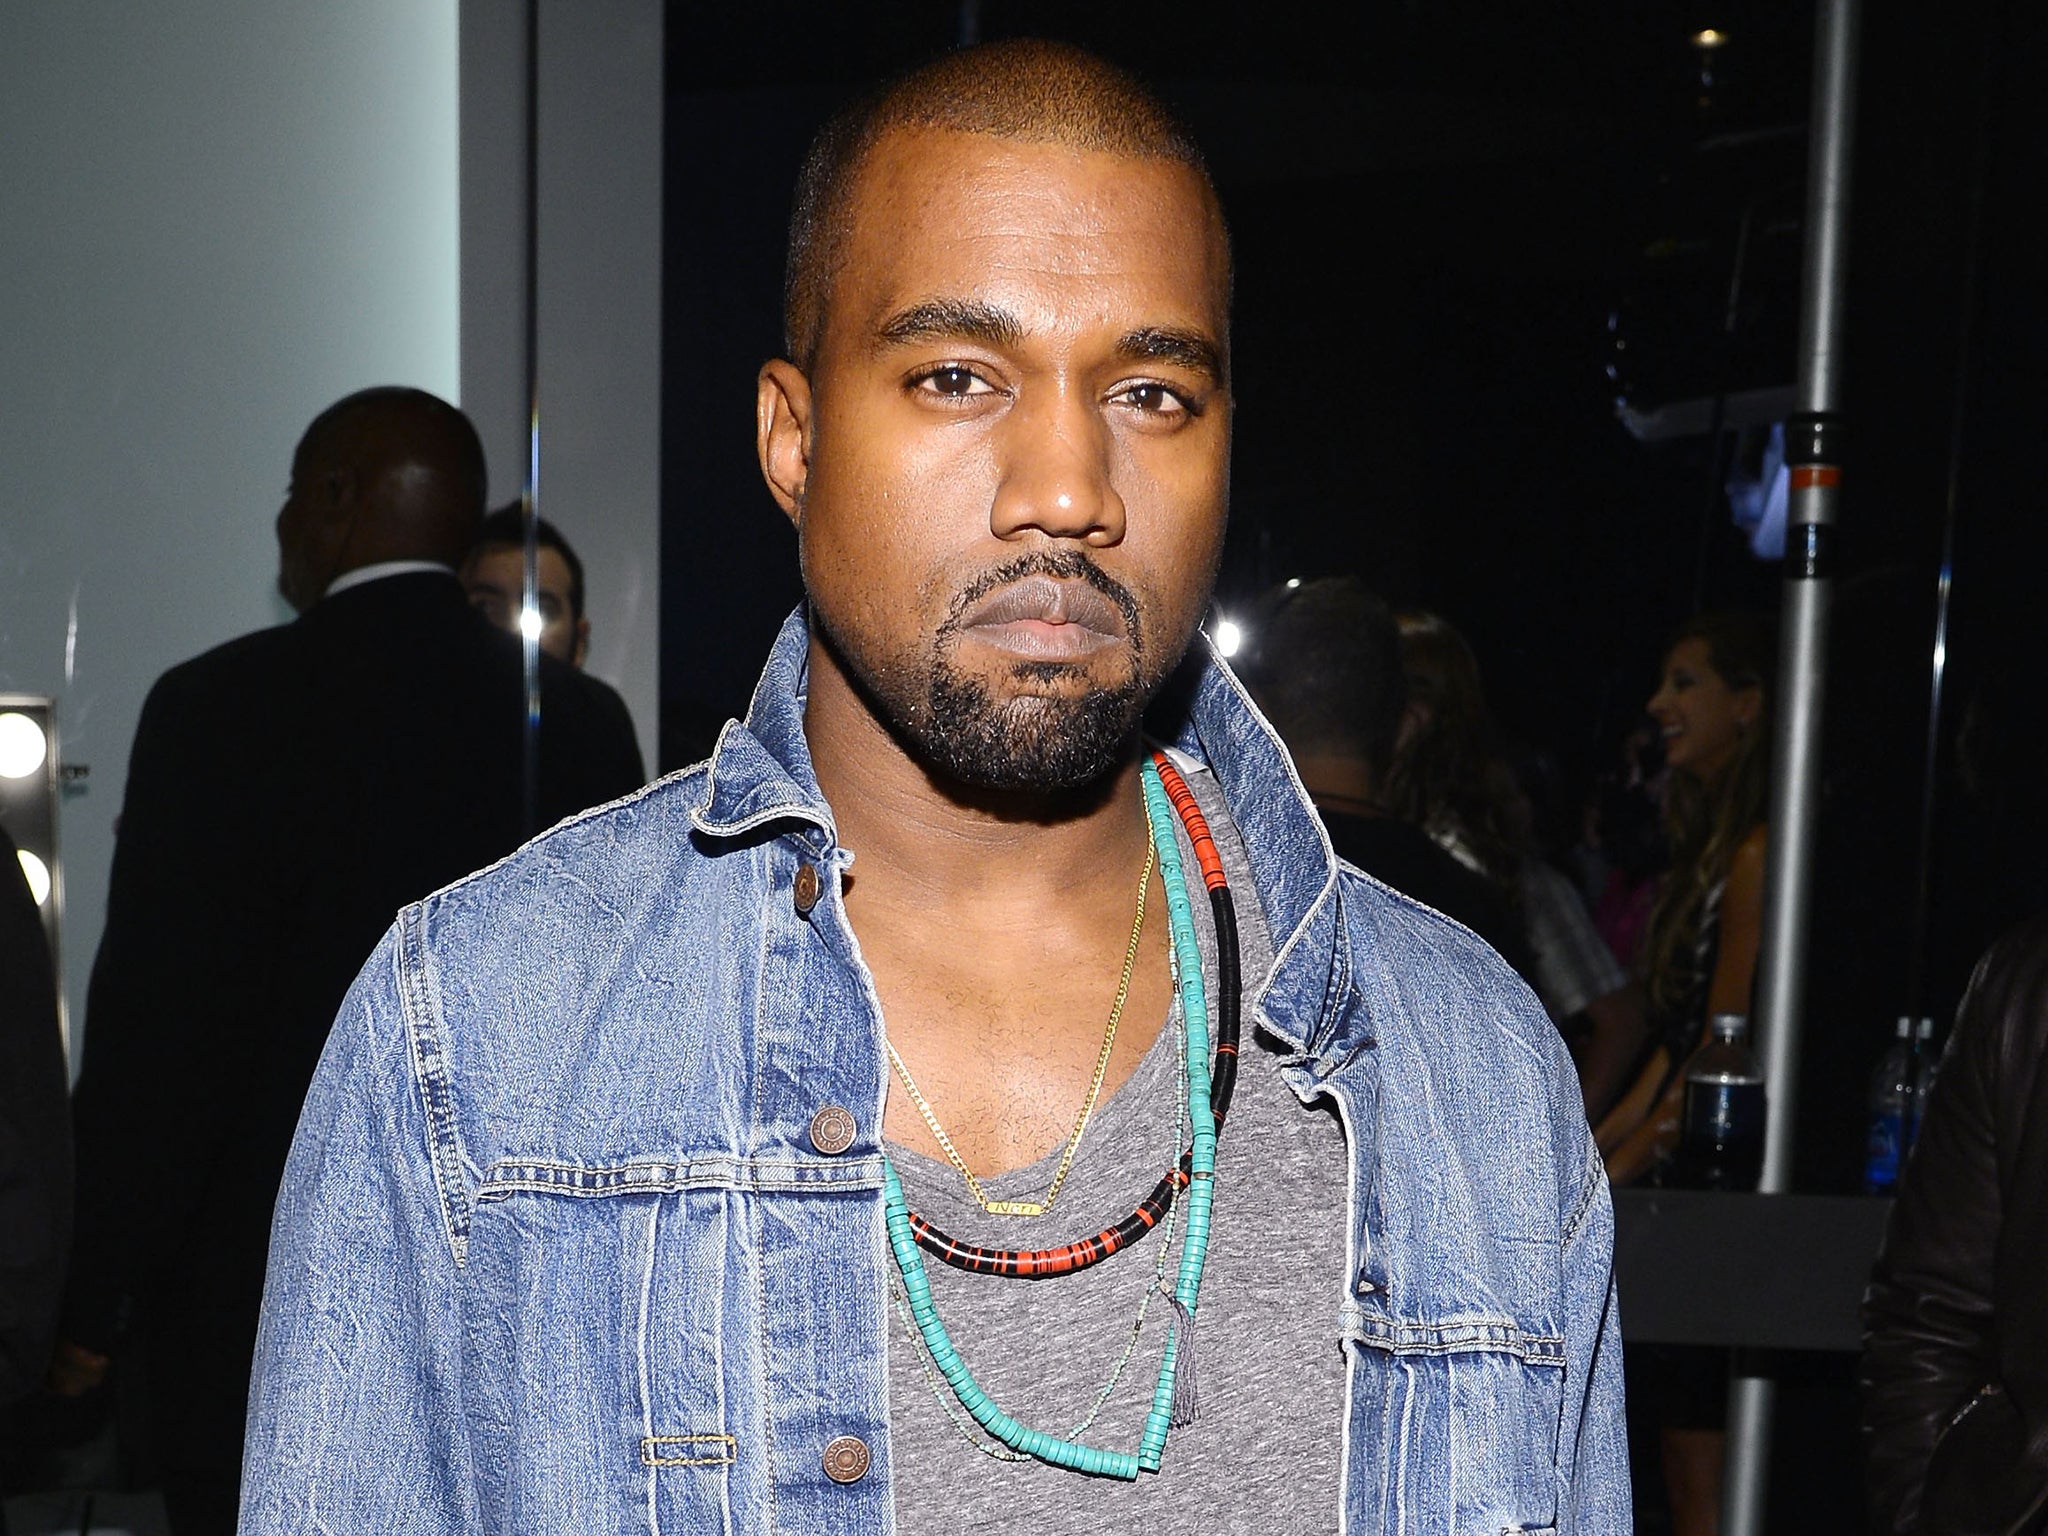 Kanye West is busy working on the follow-up to 2013's Yeezus